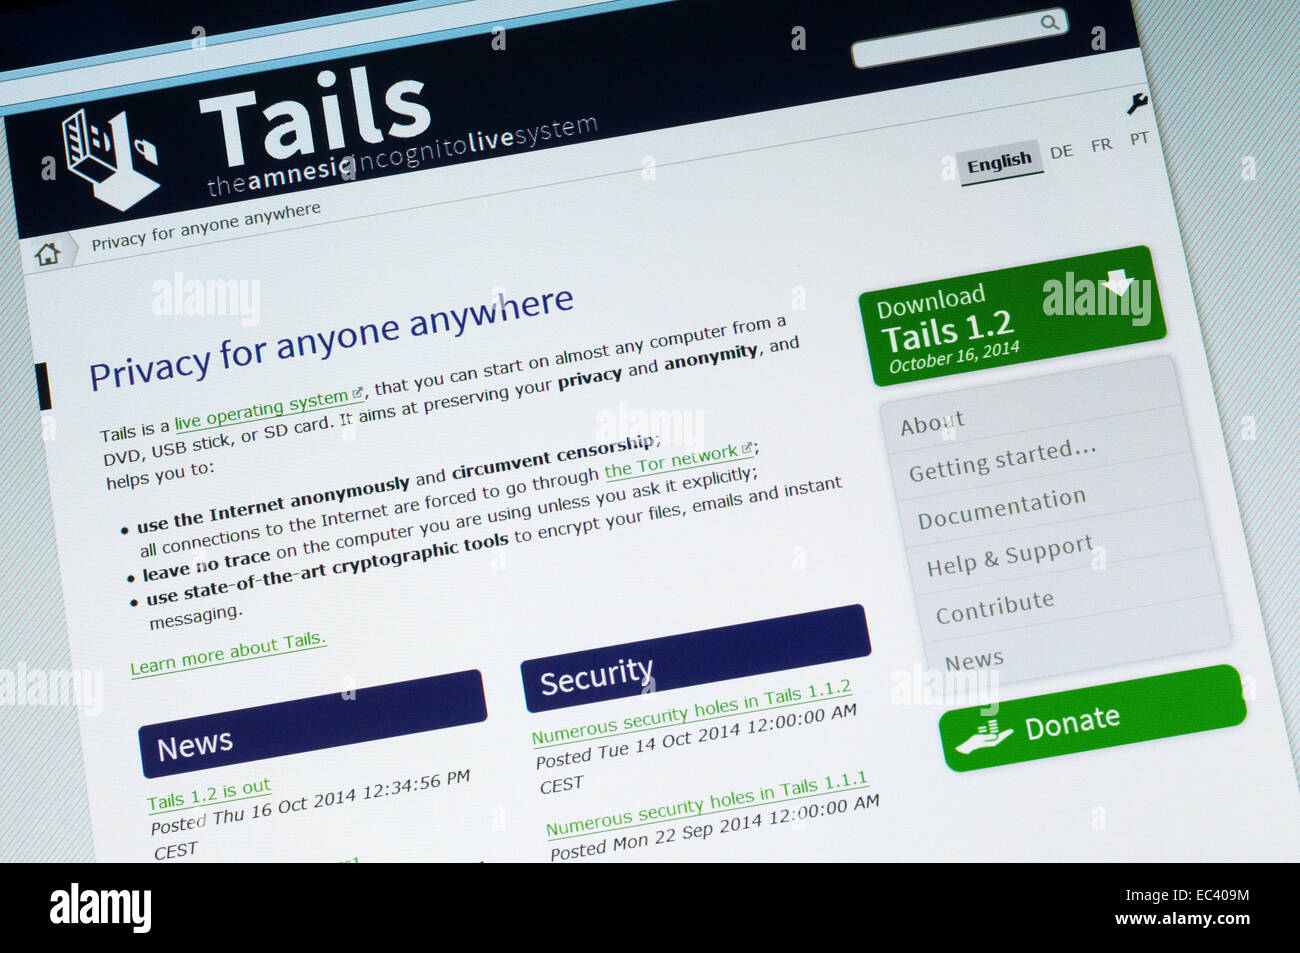 The home page of the Tails privacy web site. Stock Photo